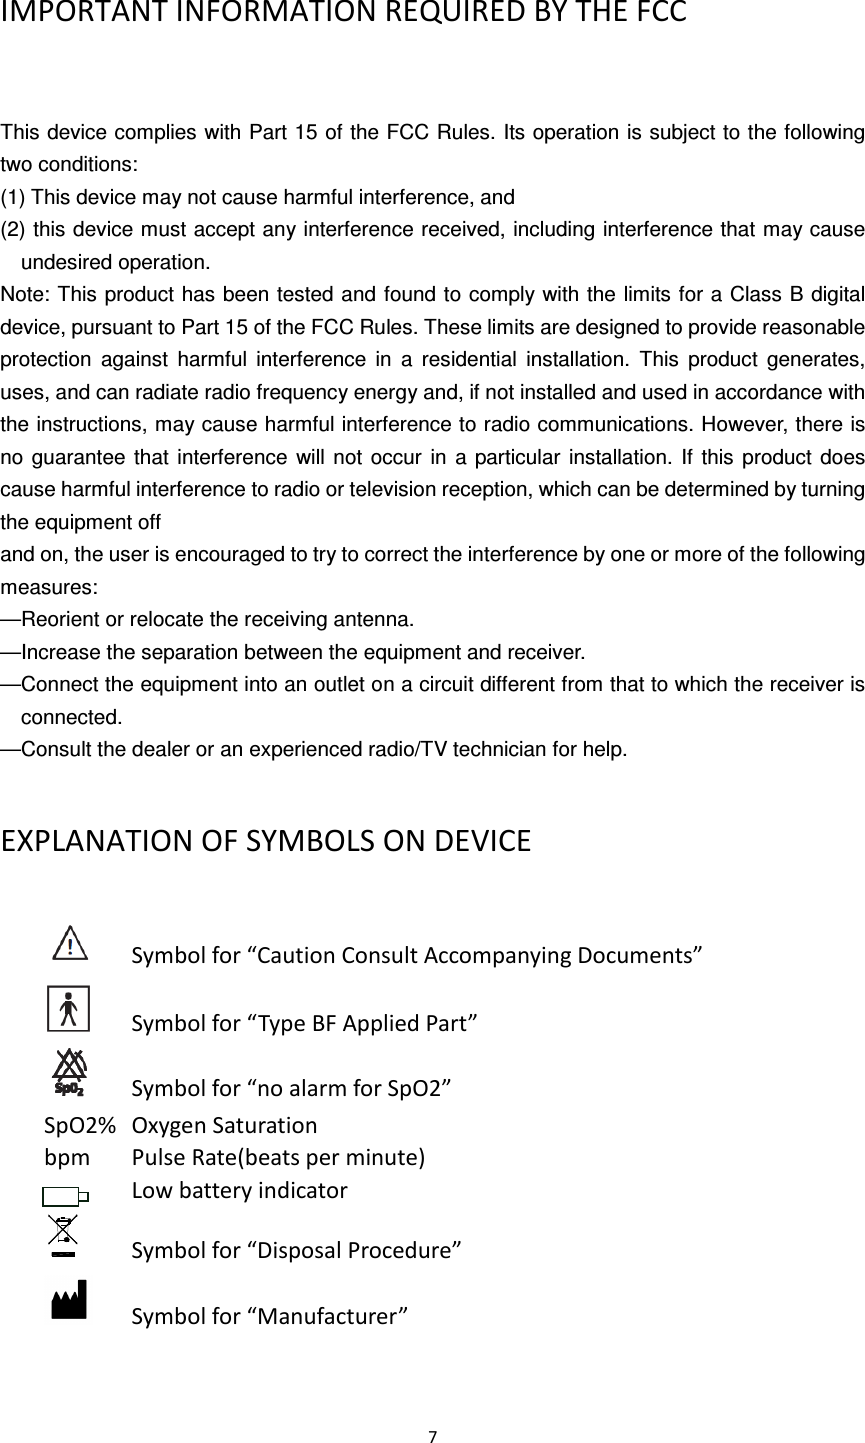  7  IMPORTANT INFORMATION REQUIRED BY THE FCC  This device complies with Part 15 of the FCC Rules. Its operation is subject to the following two conditions: (1) This device may not cause harmful interference, and (2) this device must accept any interference received, including interference that may cause undesired operation. Note: This product has  been tested and found to comply with the limits for a Class B digital device, pursuant to Part 15 of the FCC Rules. These limits are designed to provide reasonable protection  against  harmful  interference  in  a  residential  installation.  This  product  generates, uses, and can radiate radio frequency energy and, if not installed and used in accordance with the instructions, may cause harmful interference to radio communications. However, there is no  guarantee  that interference  will  not  occur  in  a  particular  installation.  If  this  product  does cause harmful interference to radio or television reception, which can be determined by turning the equipment off and on, the user is encouraged to try to correct the interference by one or more of the following measures: —Reorient or relocate the receiving antenna. —Increase the separation between the equipment and receiver. —Connect the equipment into an outlet on a circuit different from that to which the receiver is connected. —Consult the dealer or an experienced radio/TV technician for help. EXPLANATION OF SYMBOLS ON DEVICE       Symbol for “Caution Consult Accompanying Documents”       Symbol for “Type BF Applied Part”       Symbol for “no alarm for SpO2” SpO2%  Oxygen Saturation bpm  Pulse Rate(beats per minute)               Low battery indicator         Symbol for “Disposal Procedure”       Symbol for “Manufacturer” 